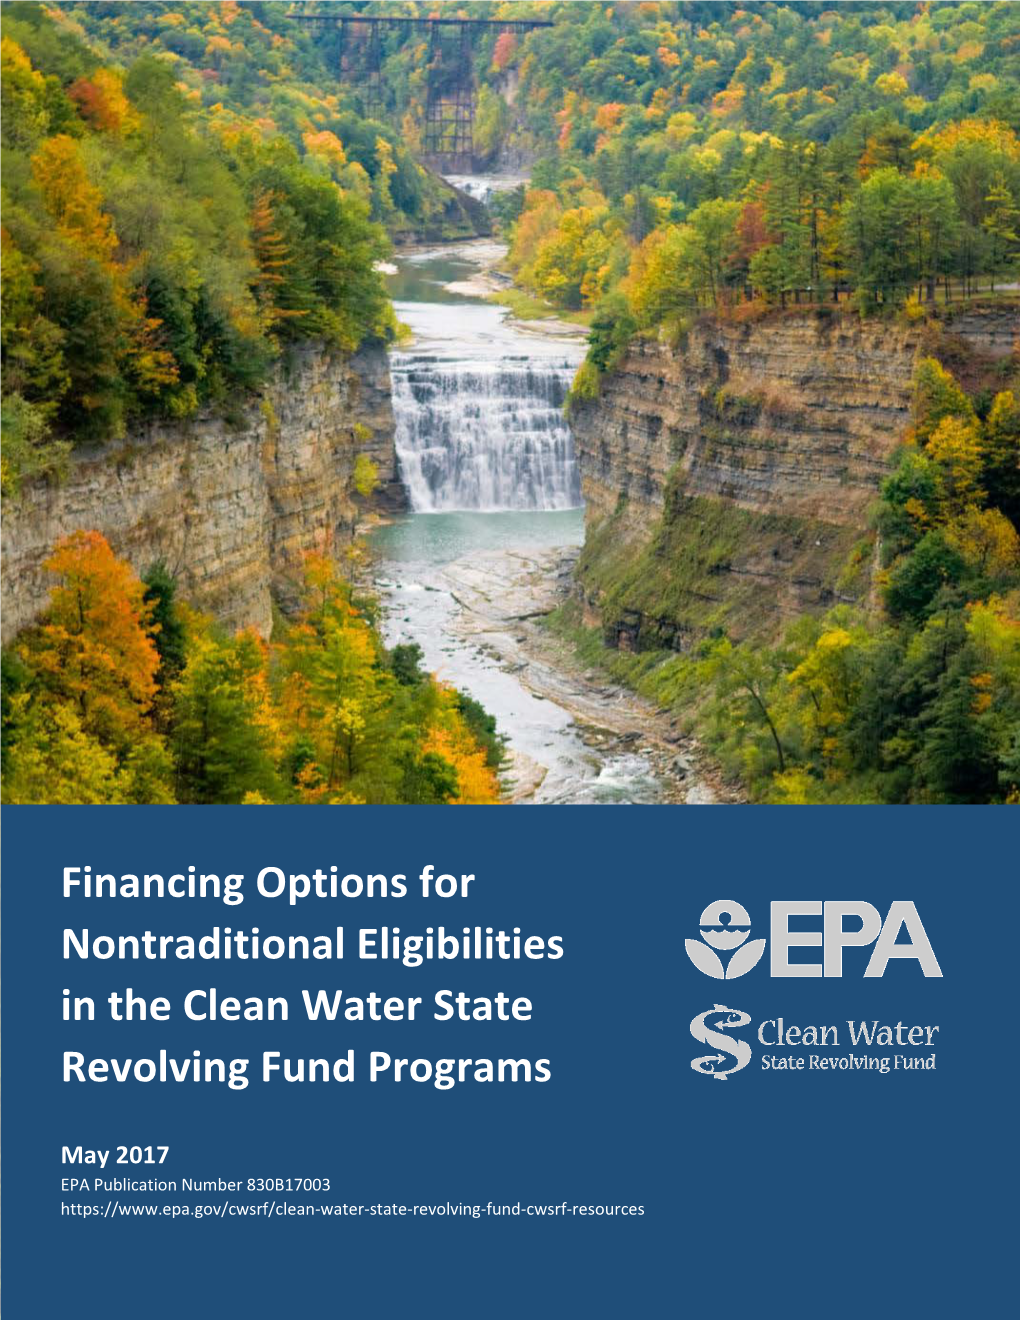 Financing Options for Nontraditional Eligibilities in the Clean Water State Revolving Fund Programs